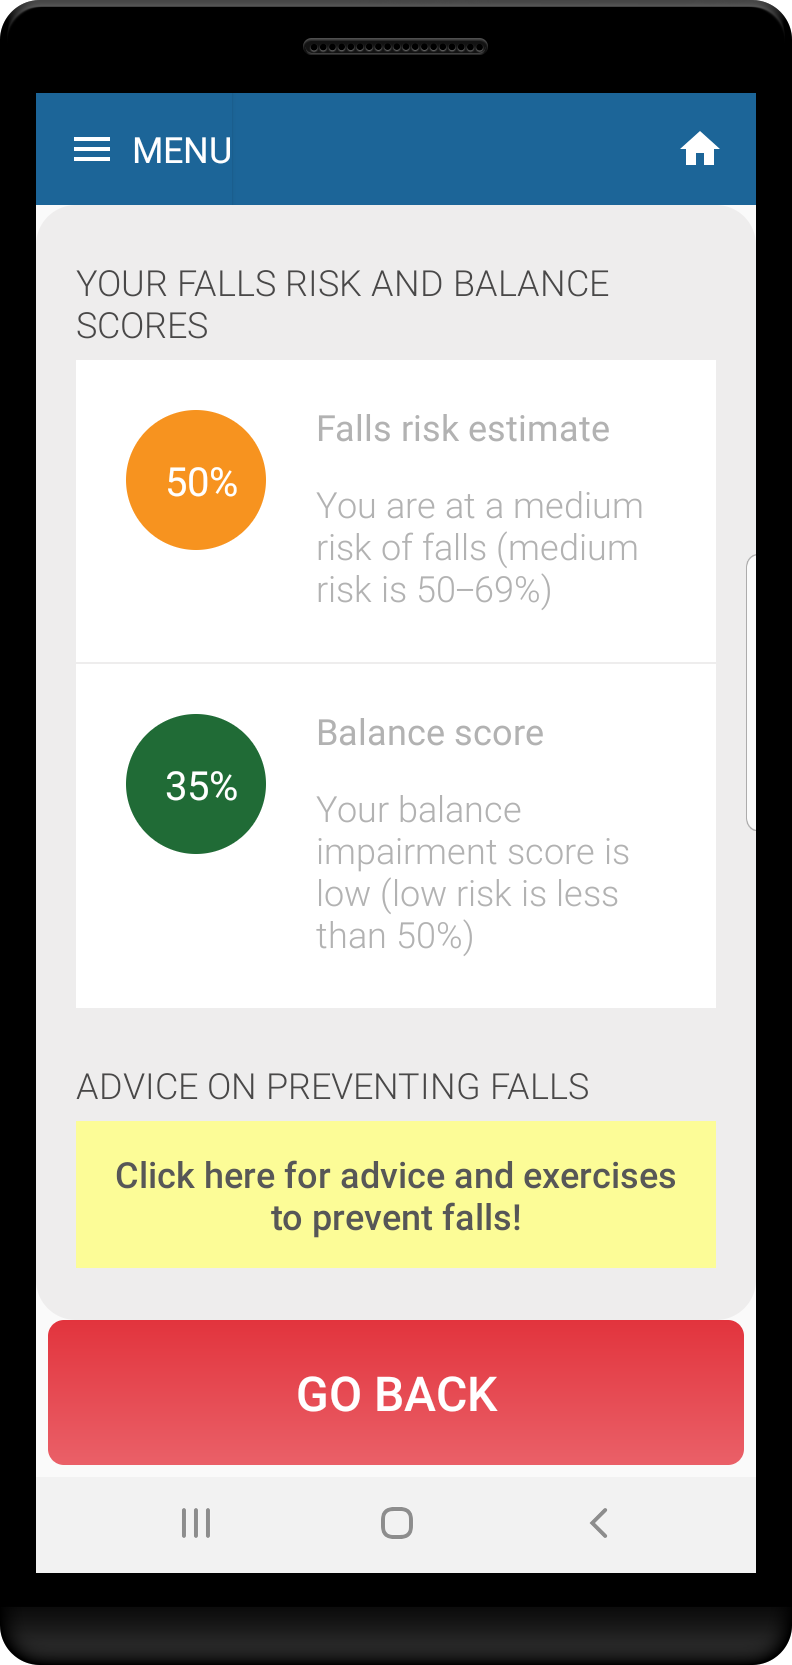 Advice and exercises to prevent falls